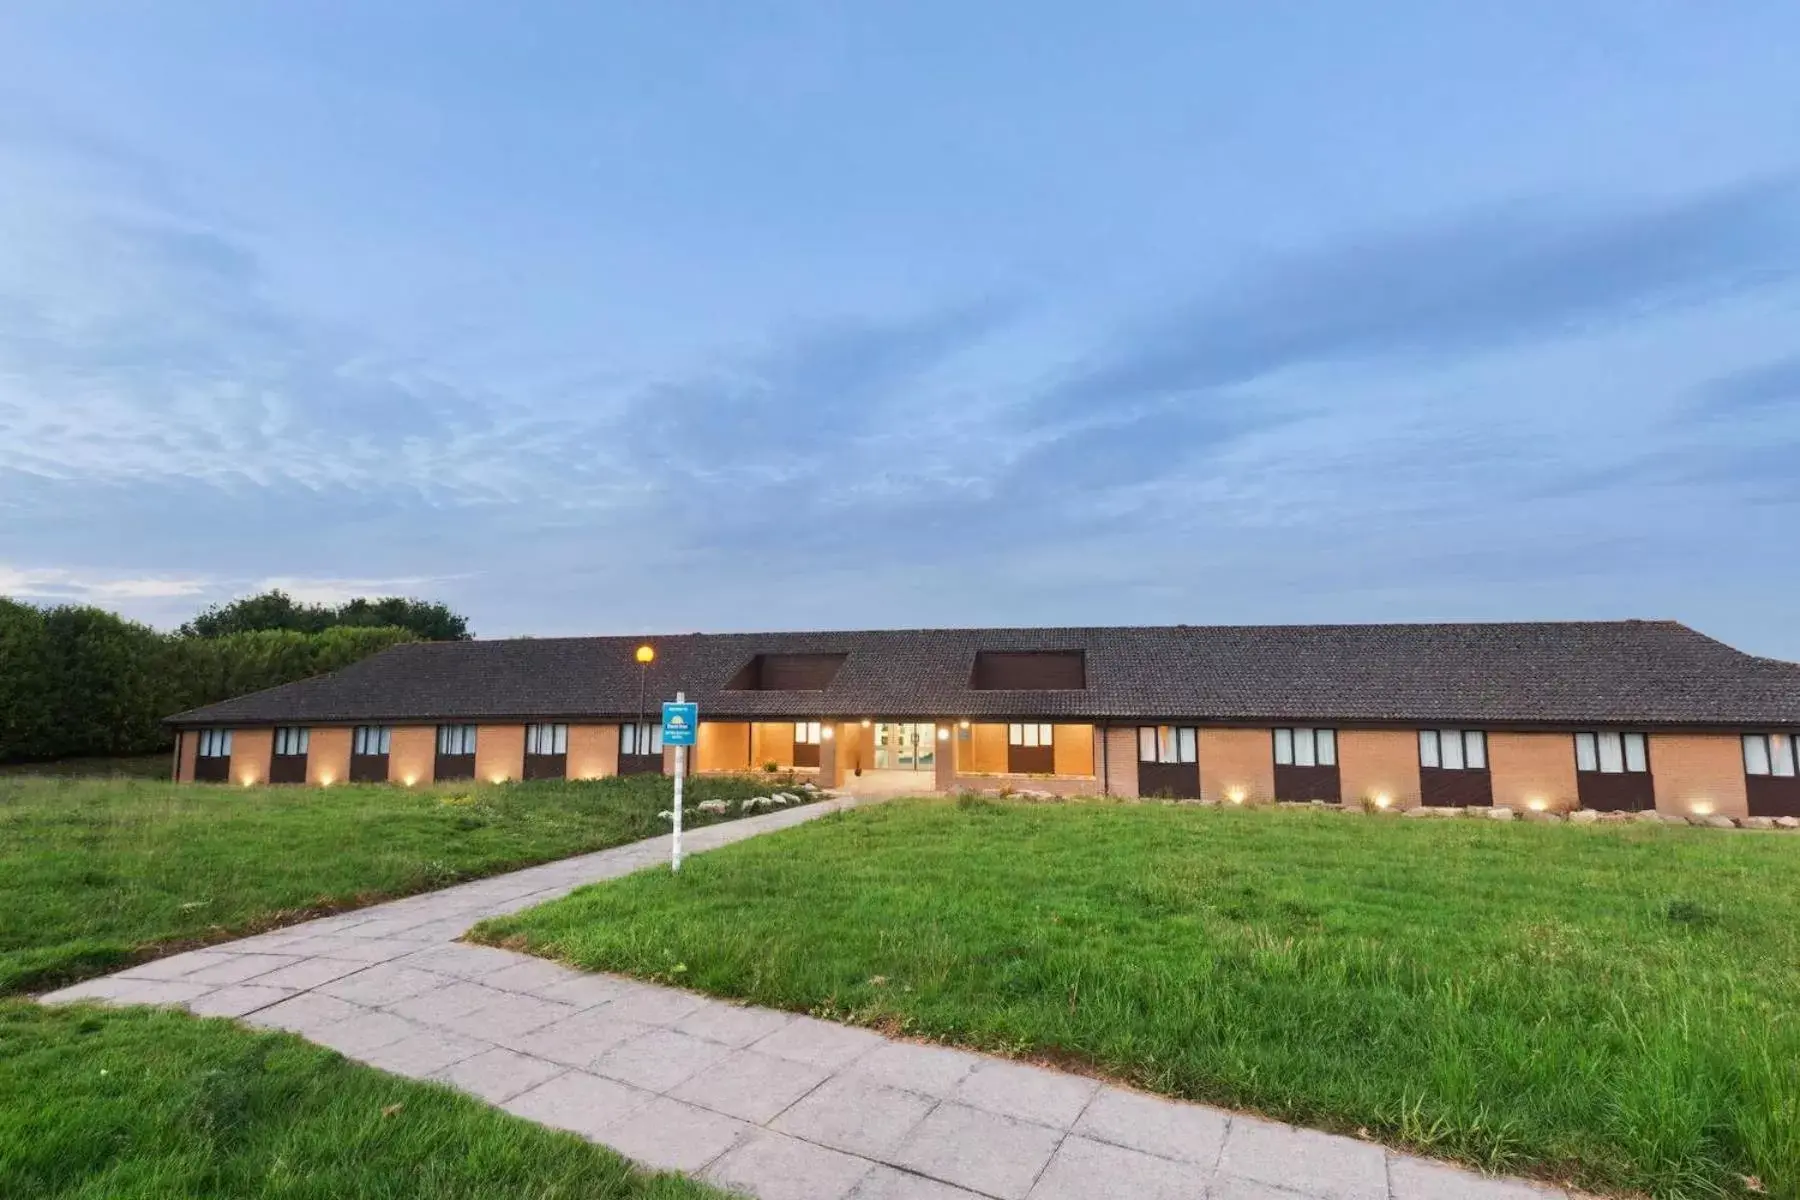 Property Building in Days Inn Sutton Scotney South